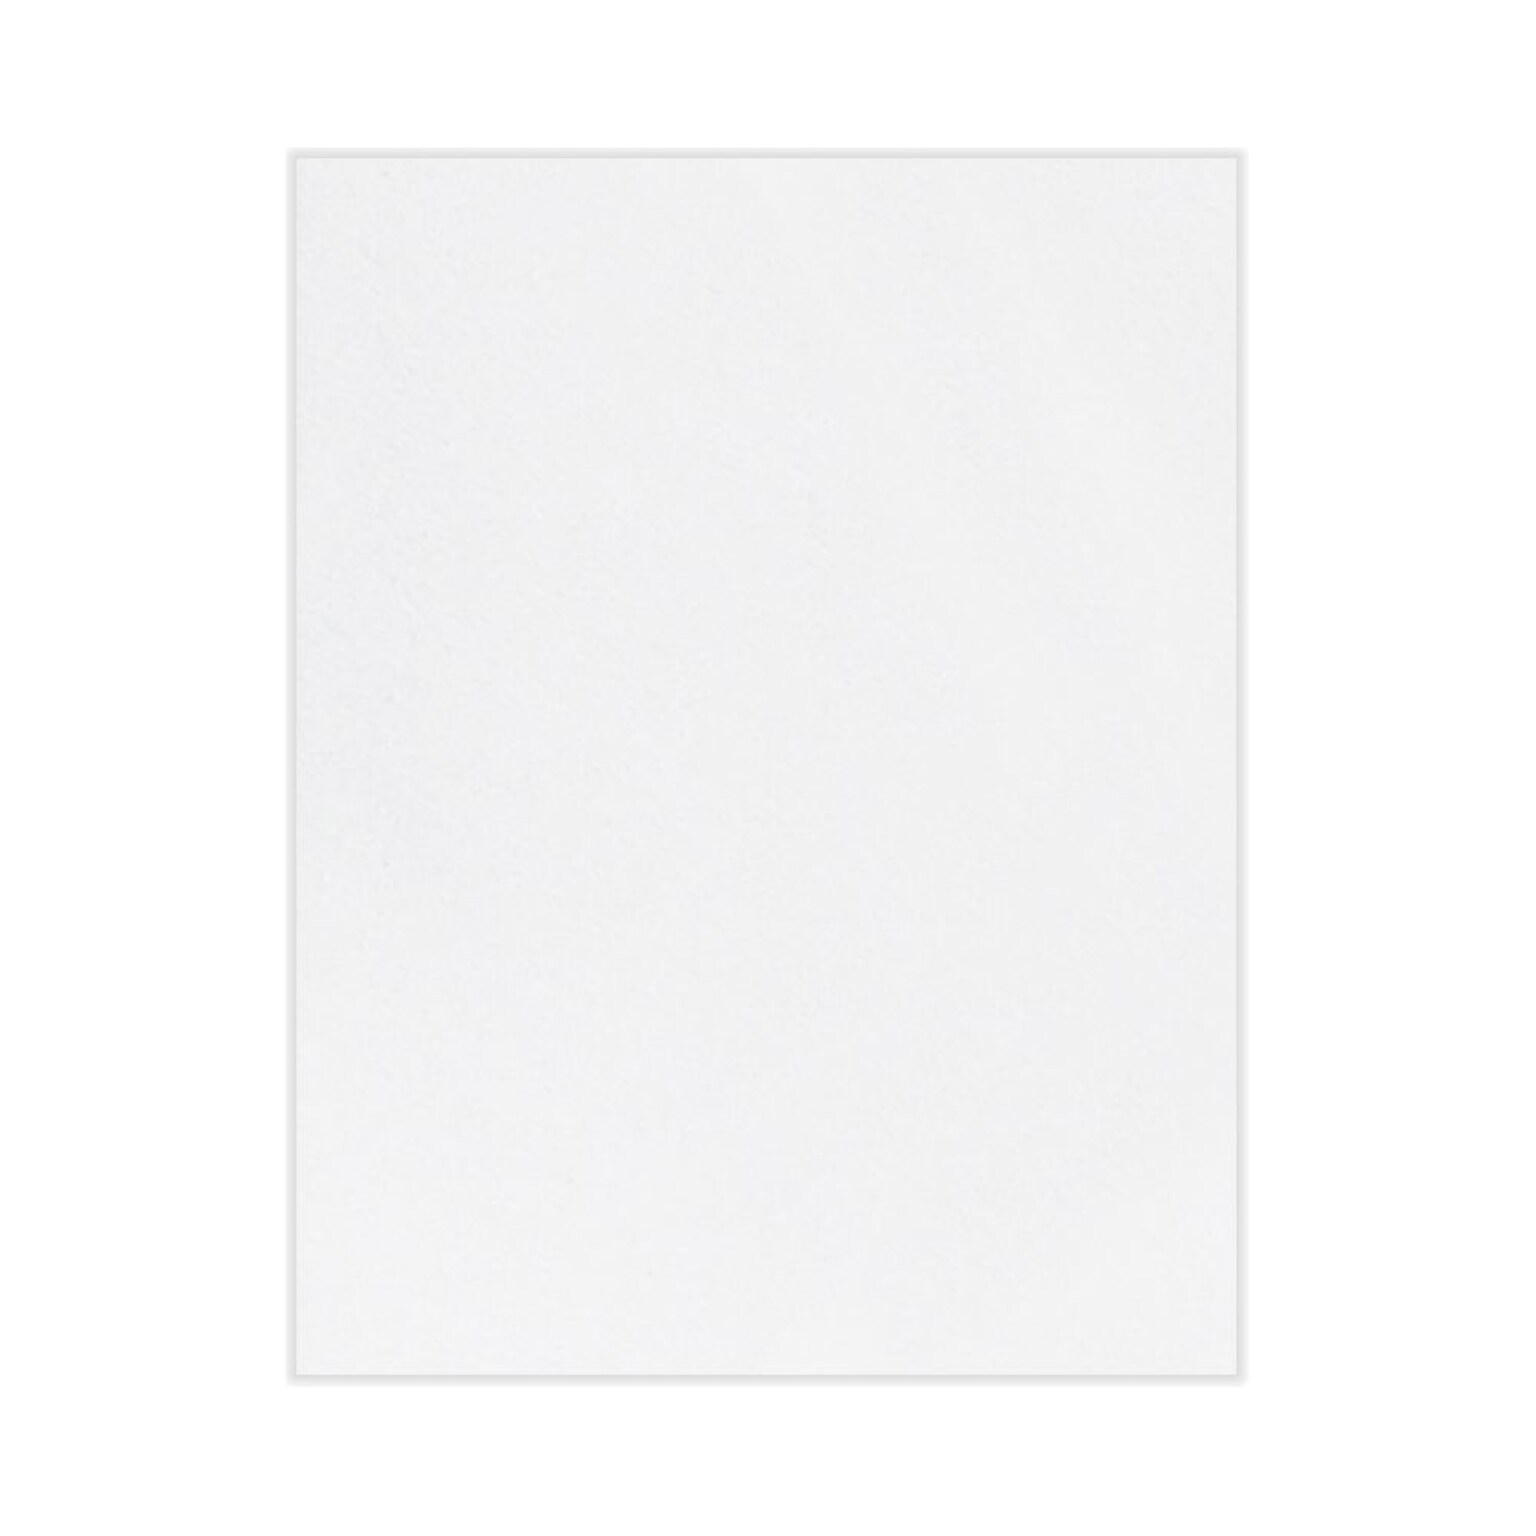 Lux Cardstock 8.5 x 11 inch Bright White 50/Pack